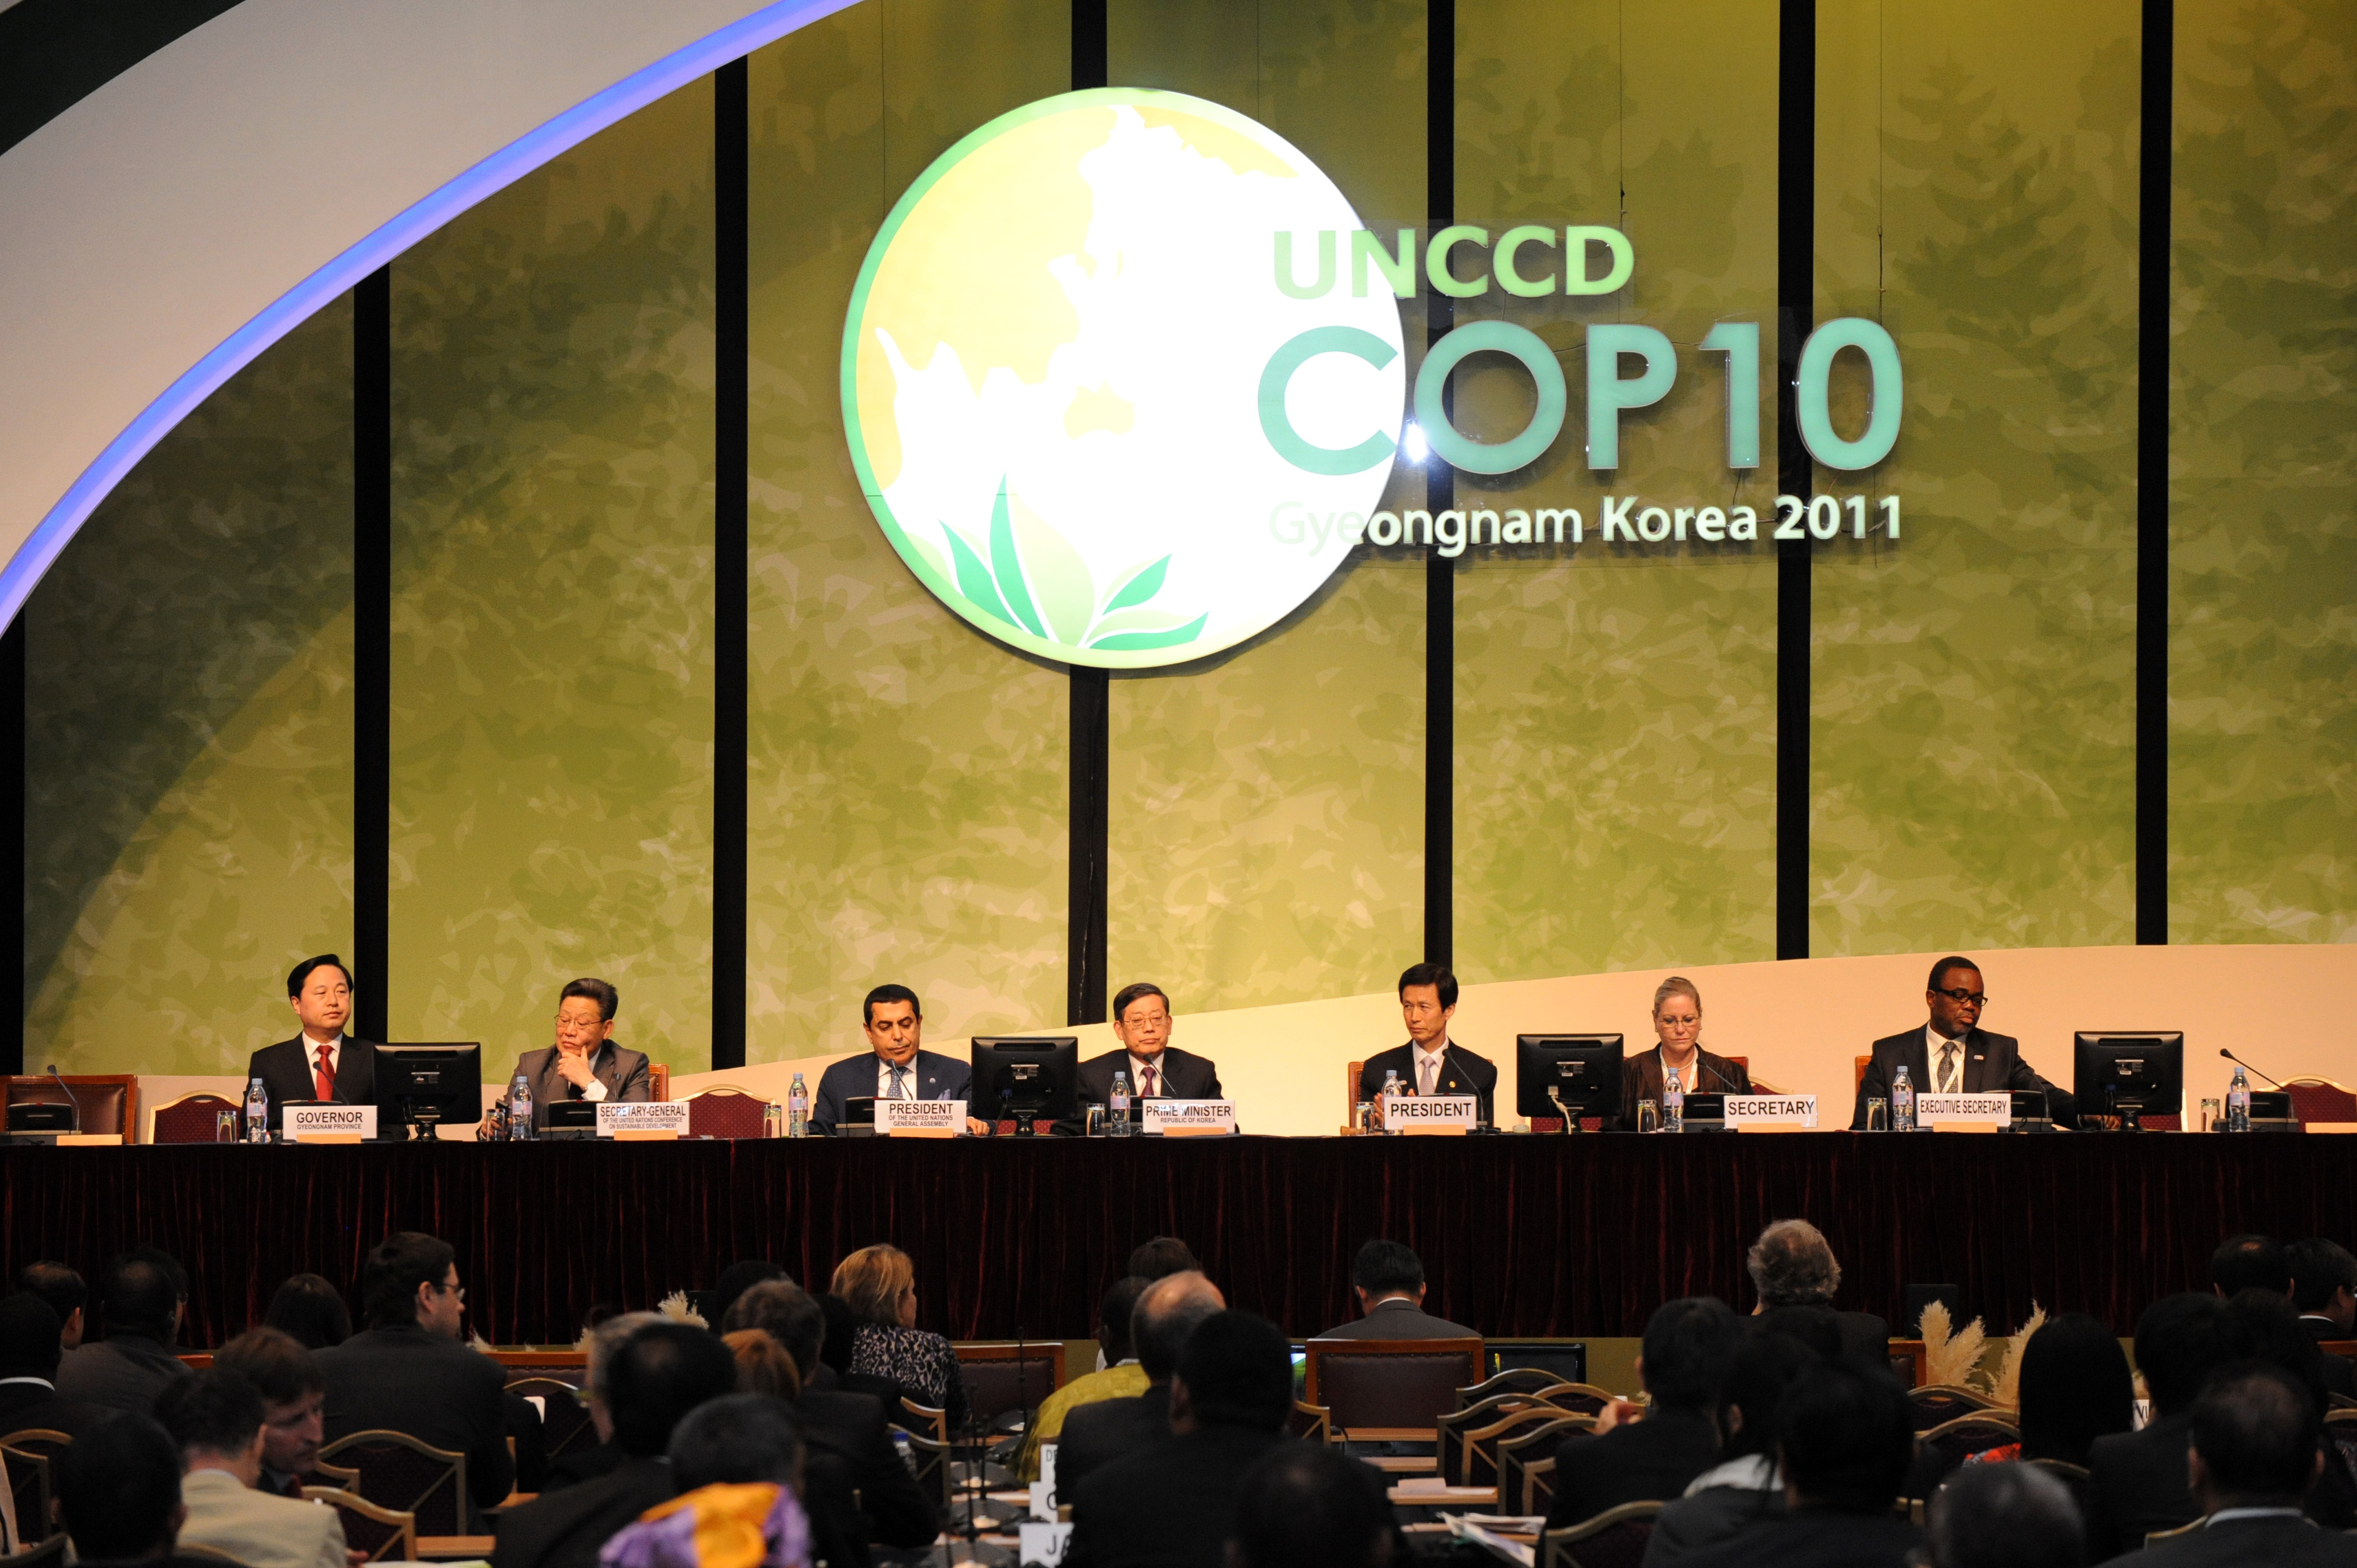 KFS successfully hosted the UNCCD COP10